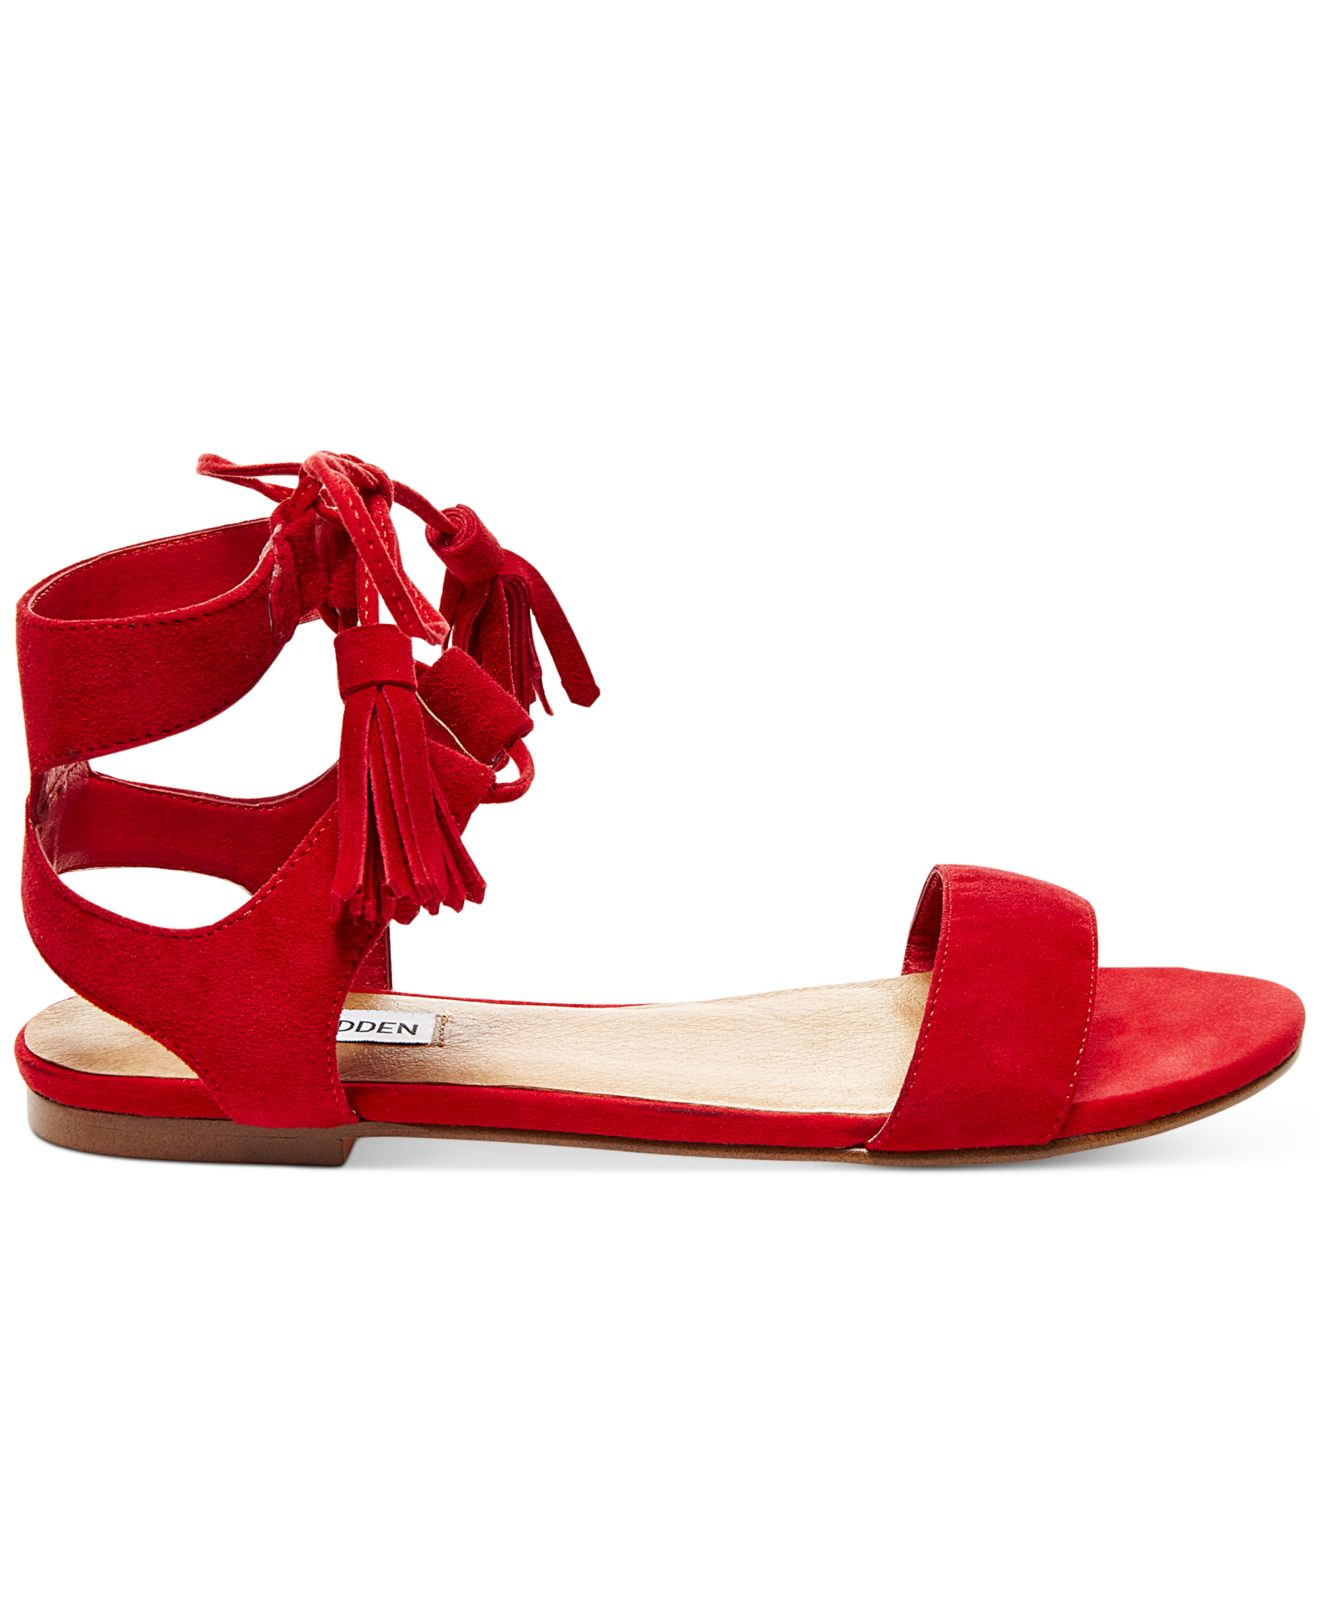 Steve Madden Lace Women's Daryyn Strappy Sandals in Red Suede (Red) | Lyst